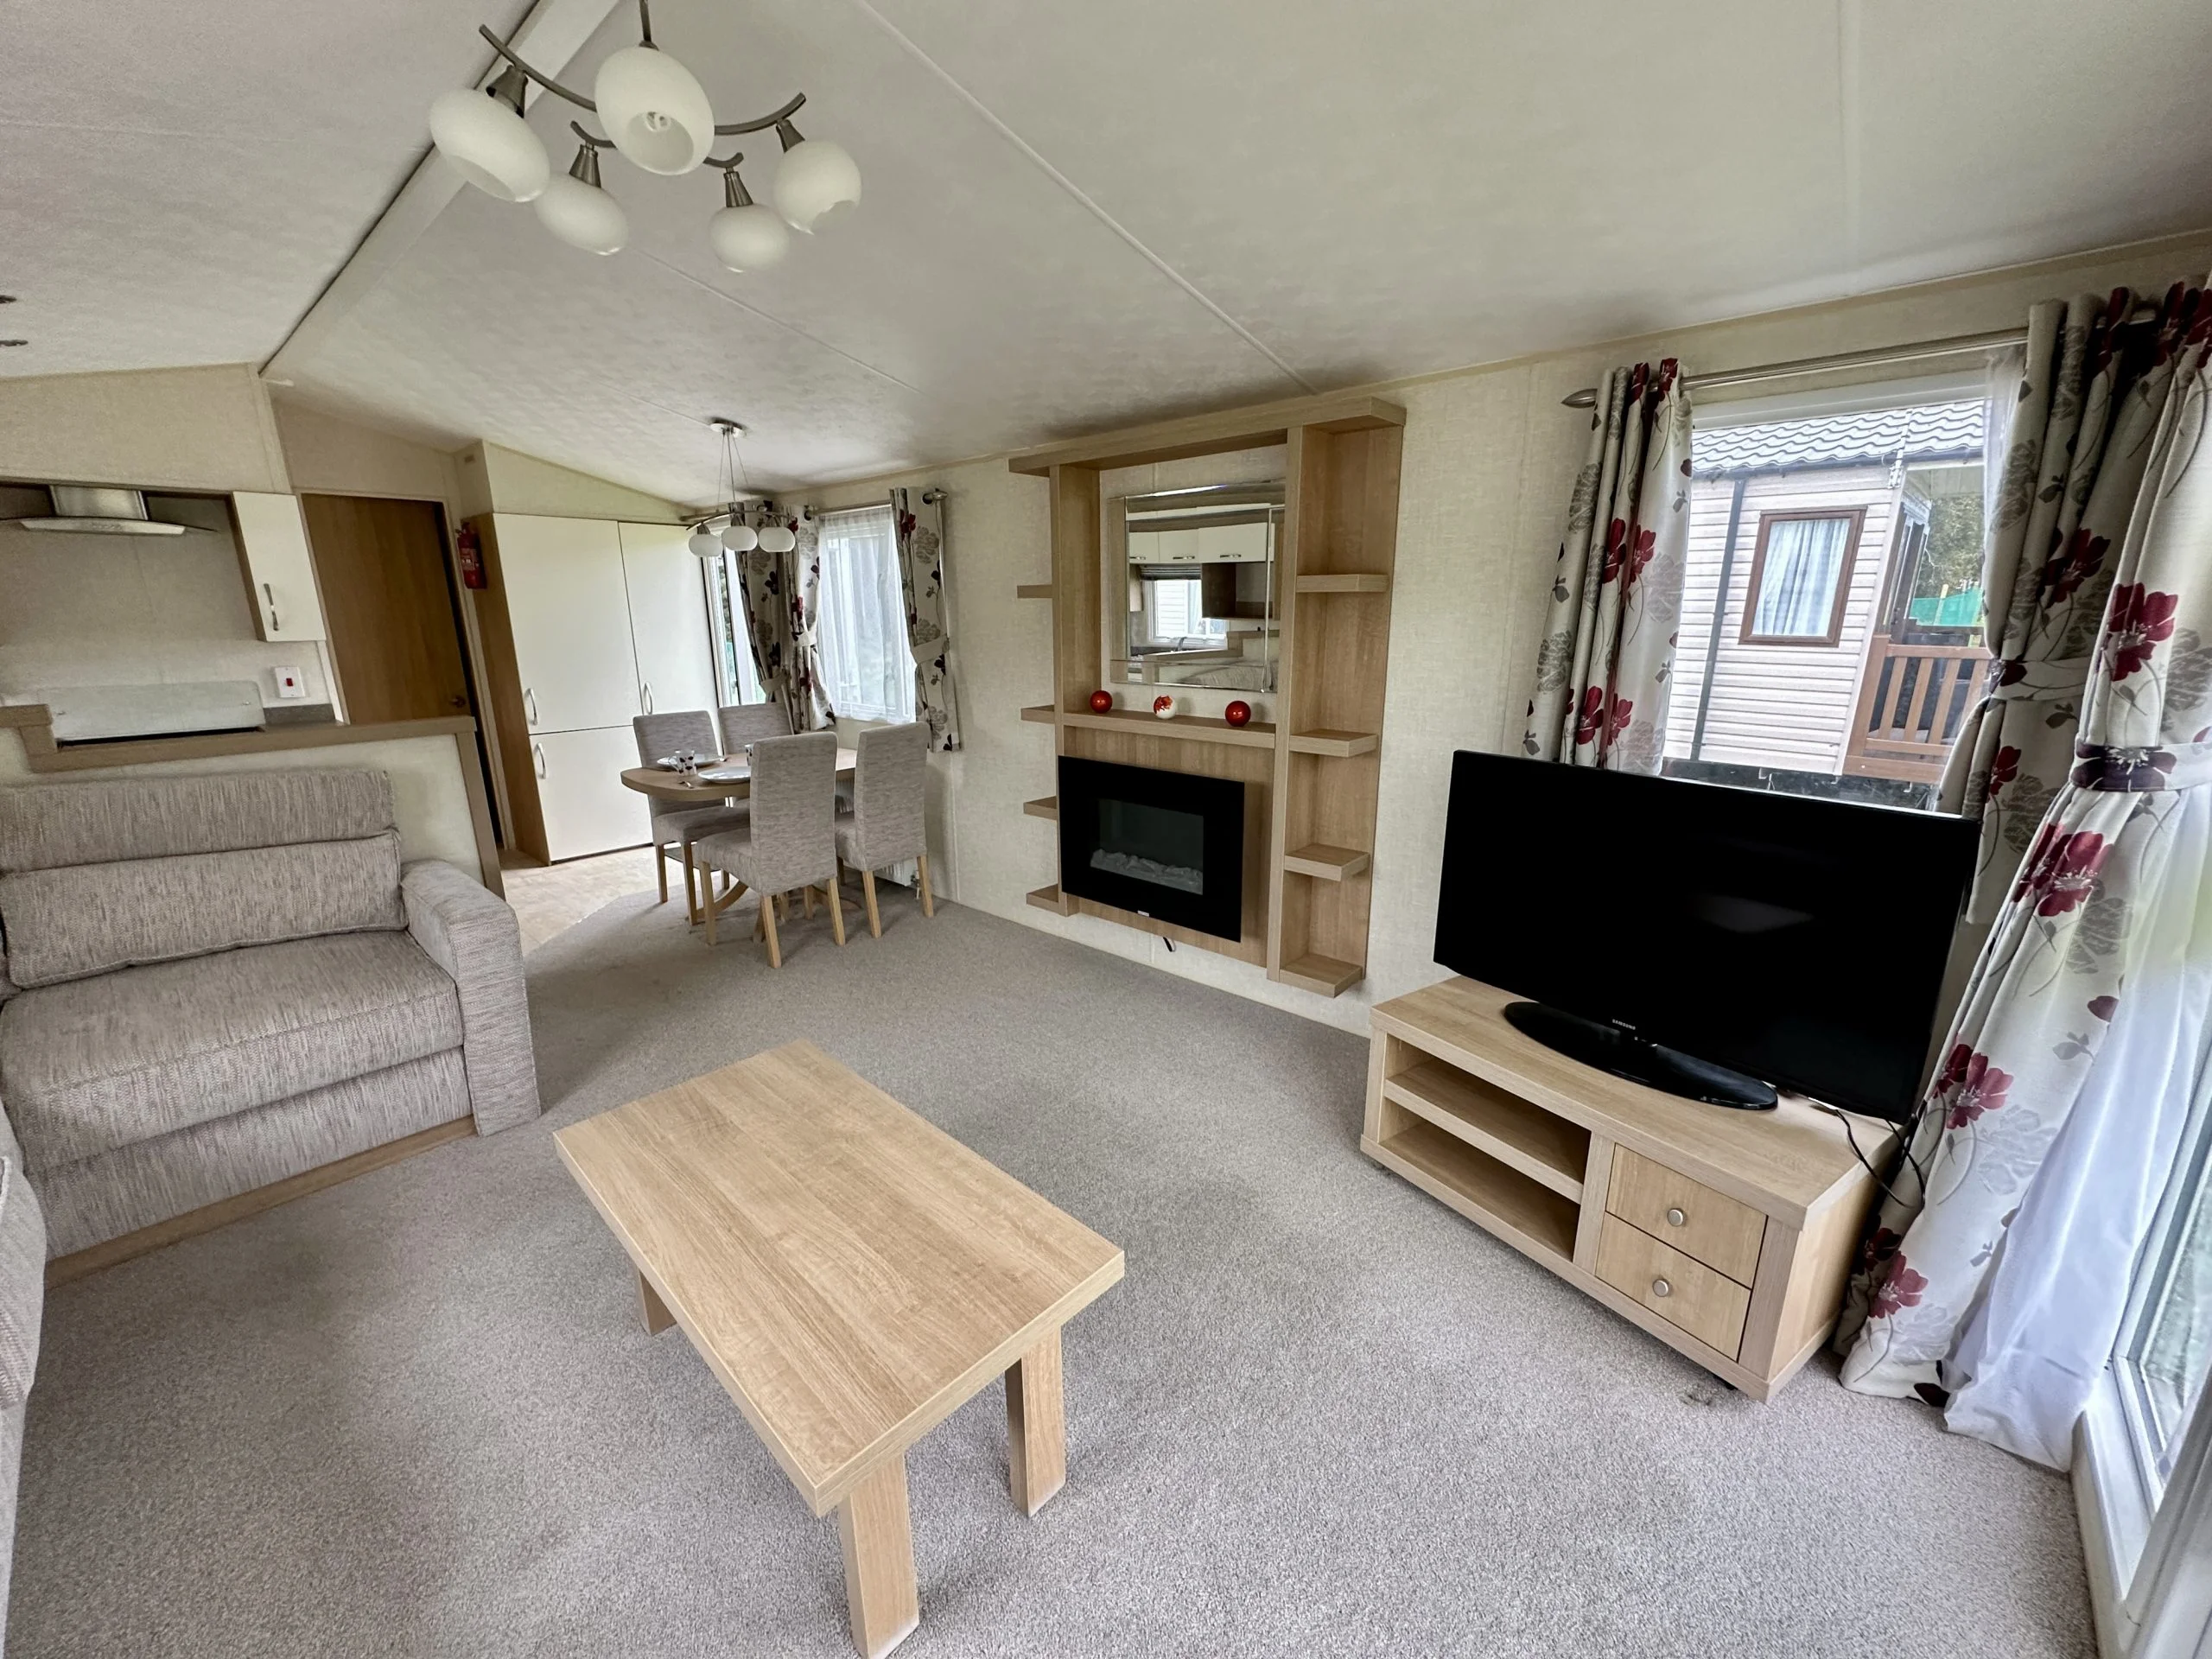 Willerby Avonmore Tv and fire place